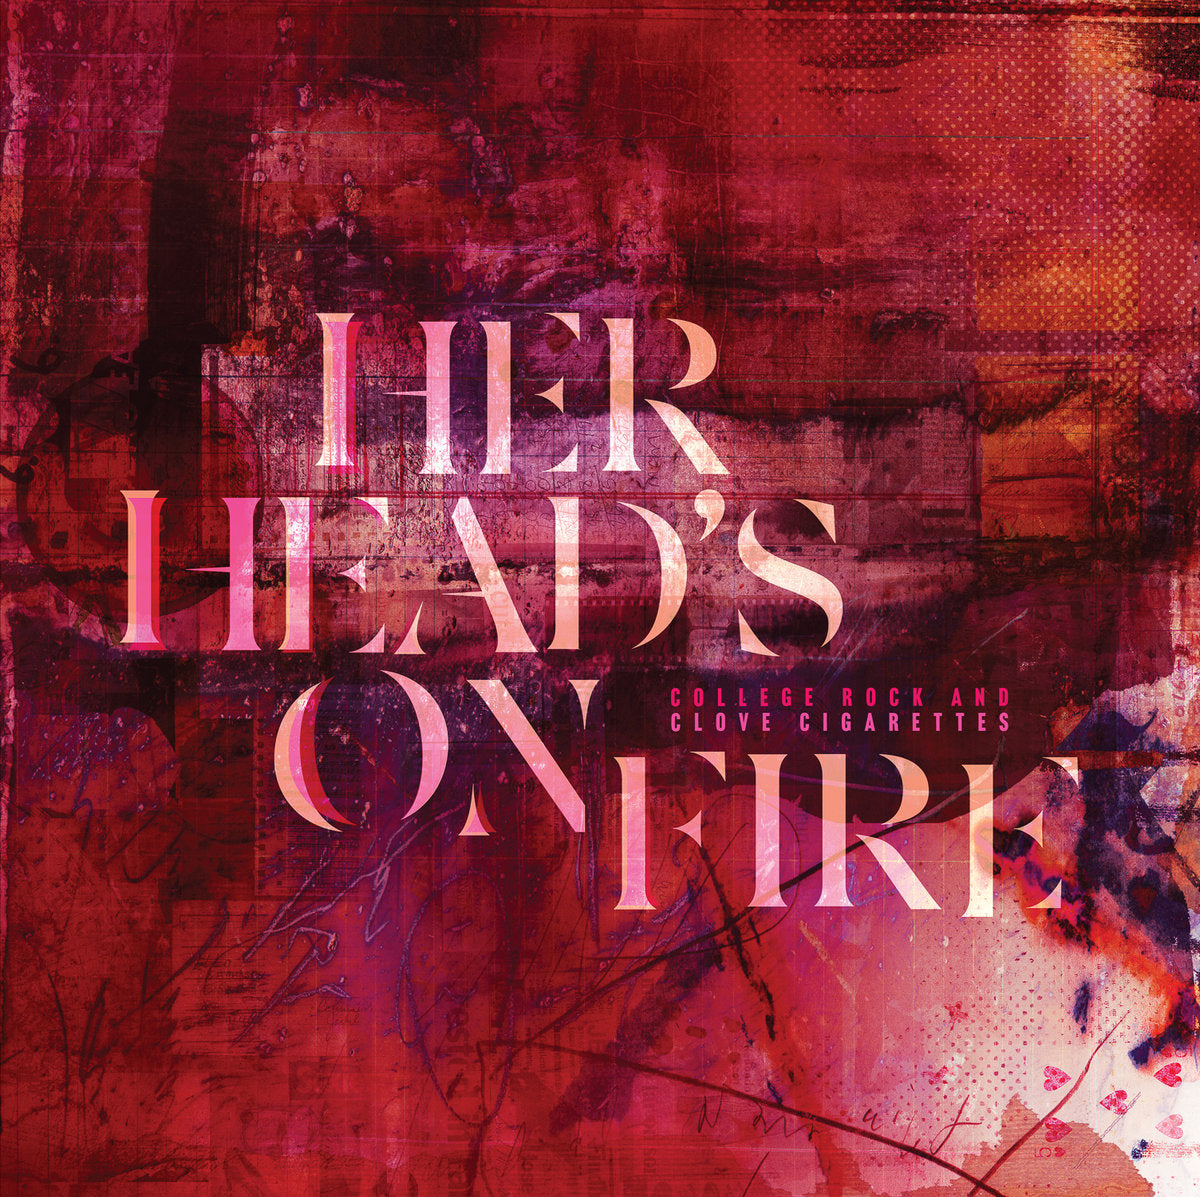 Her Head’s On Fire  "College Rock and Clove Cigarettes" LP